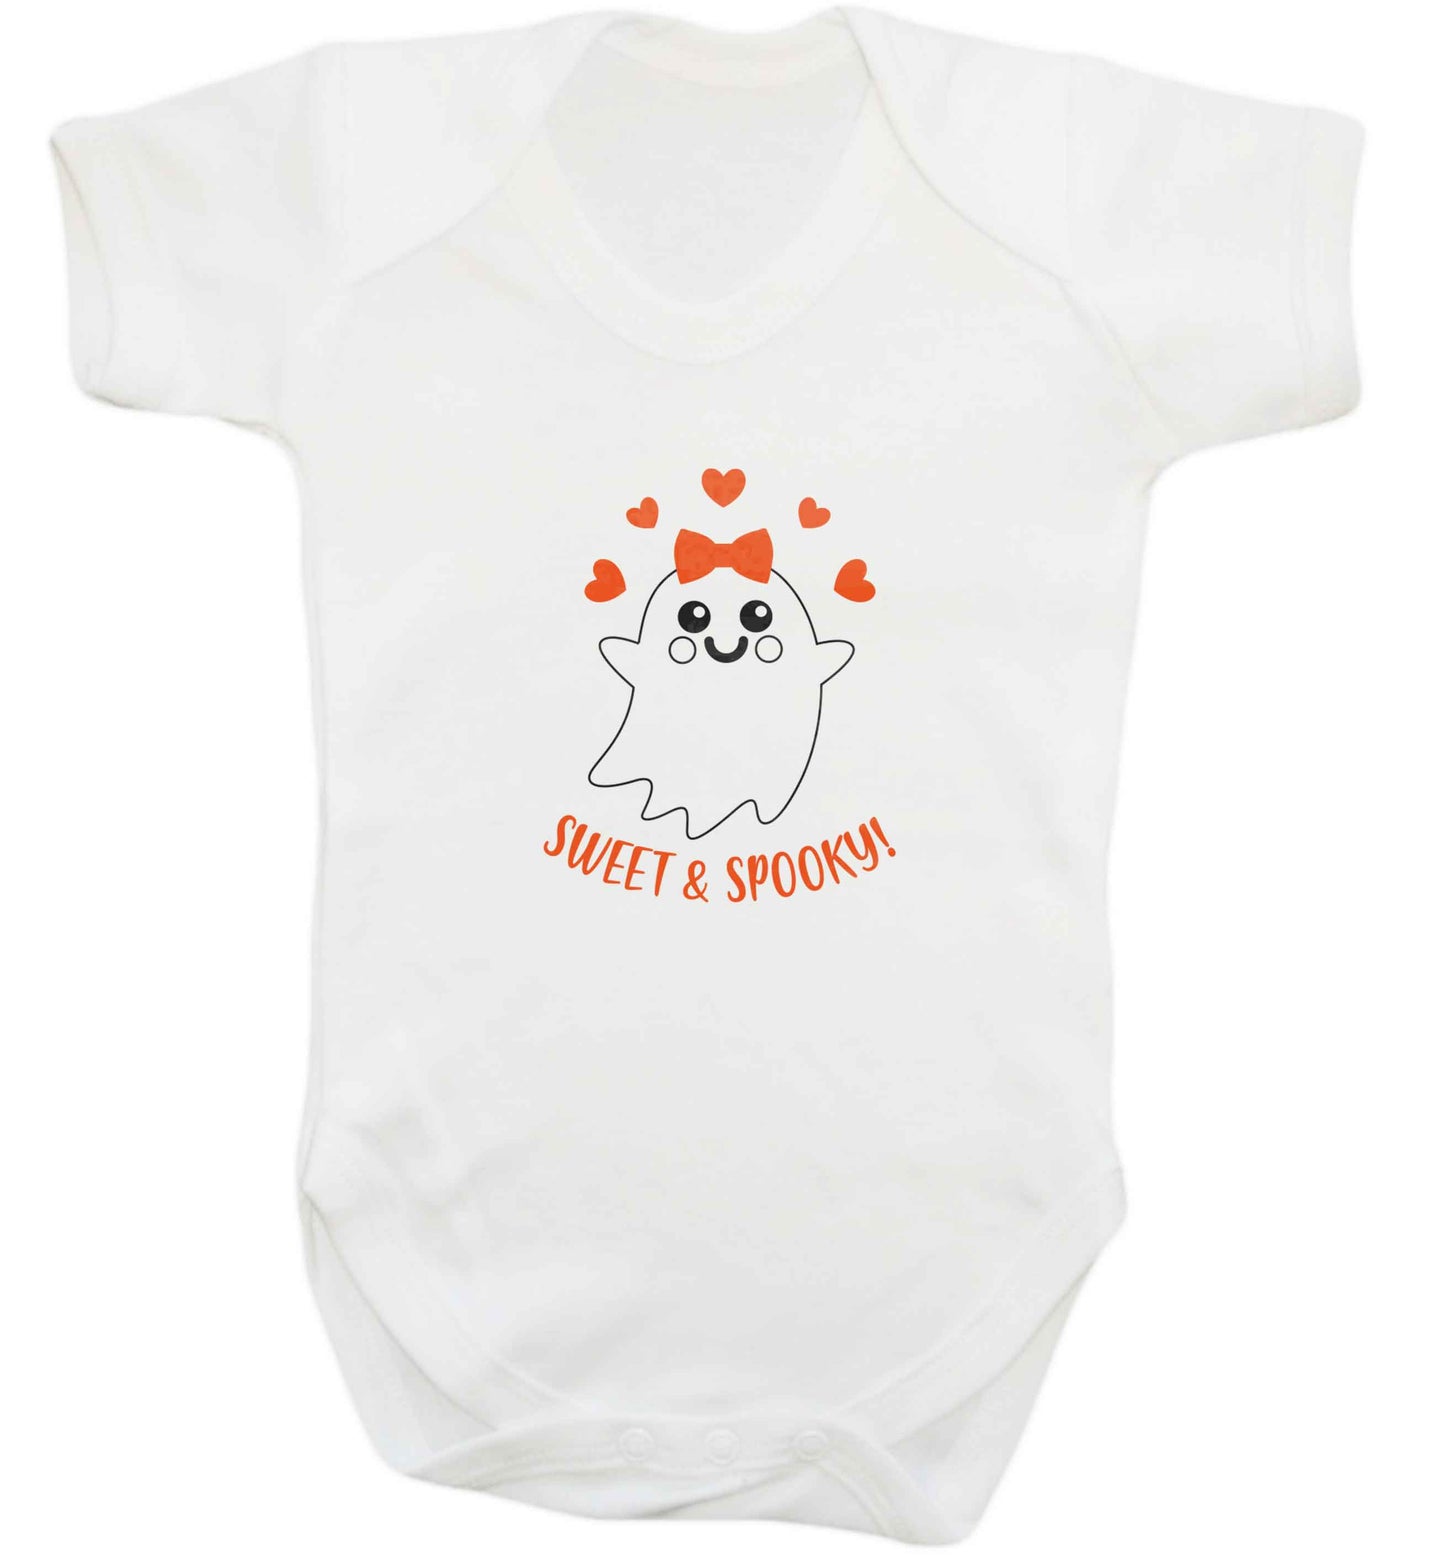 Sweet and spooky baby vest white 18-24 months